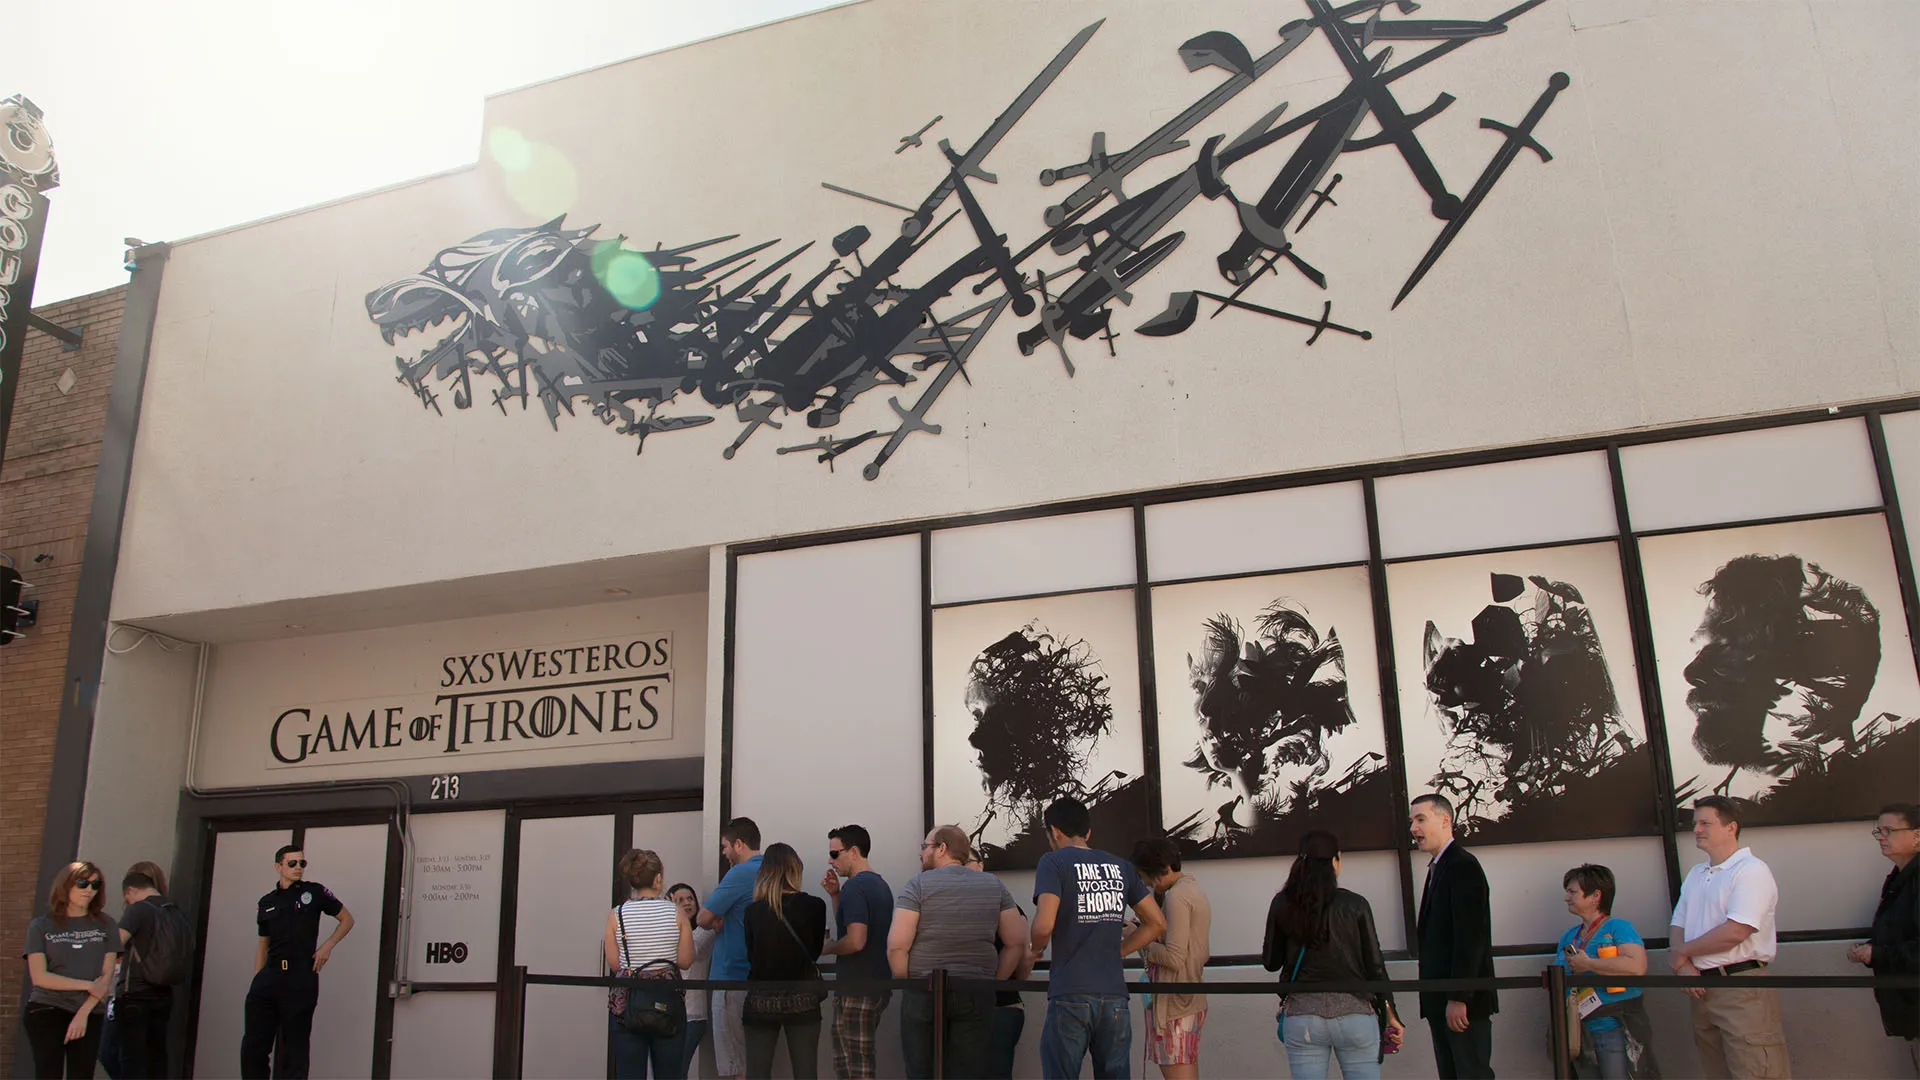 Game of Thrones Sword Experience - the line outside sxswesteros